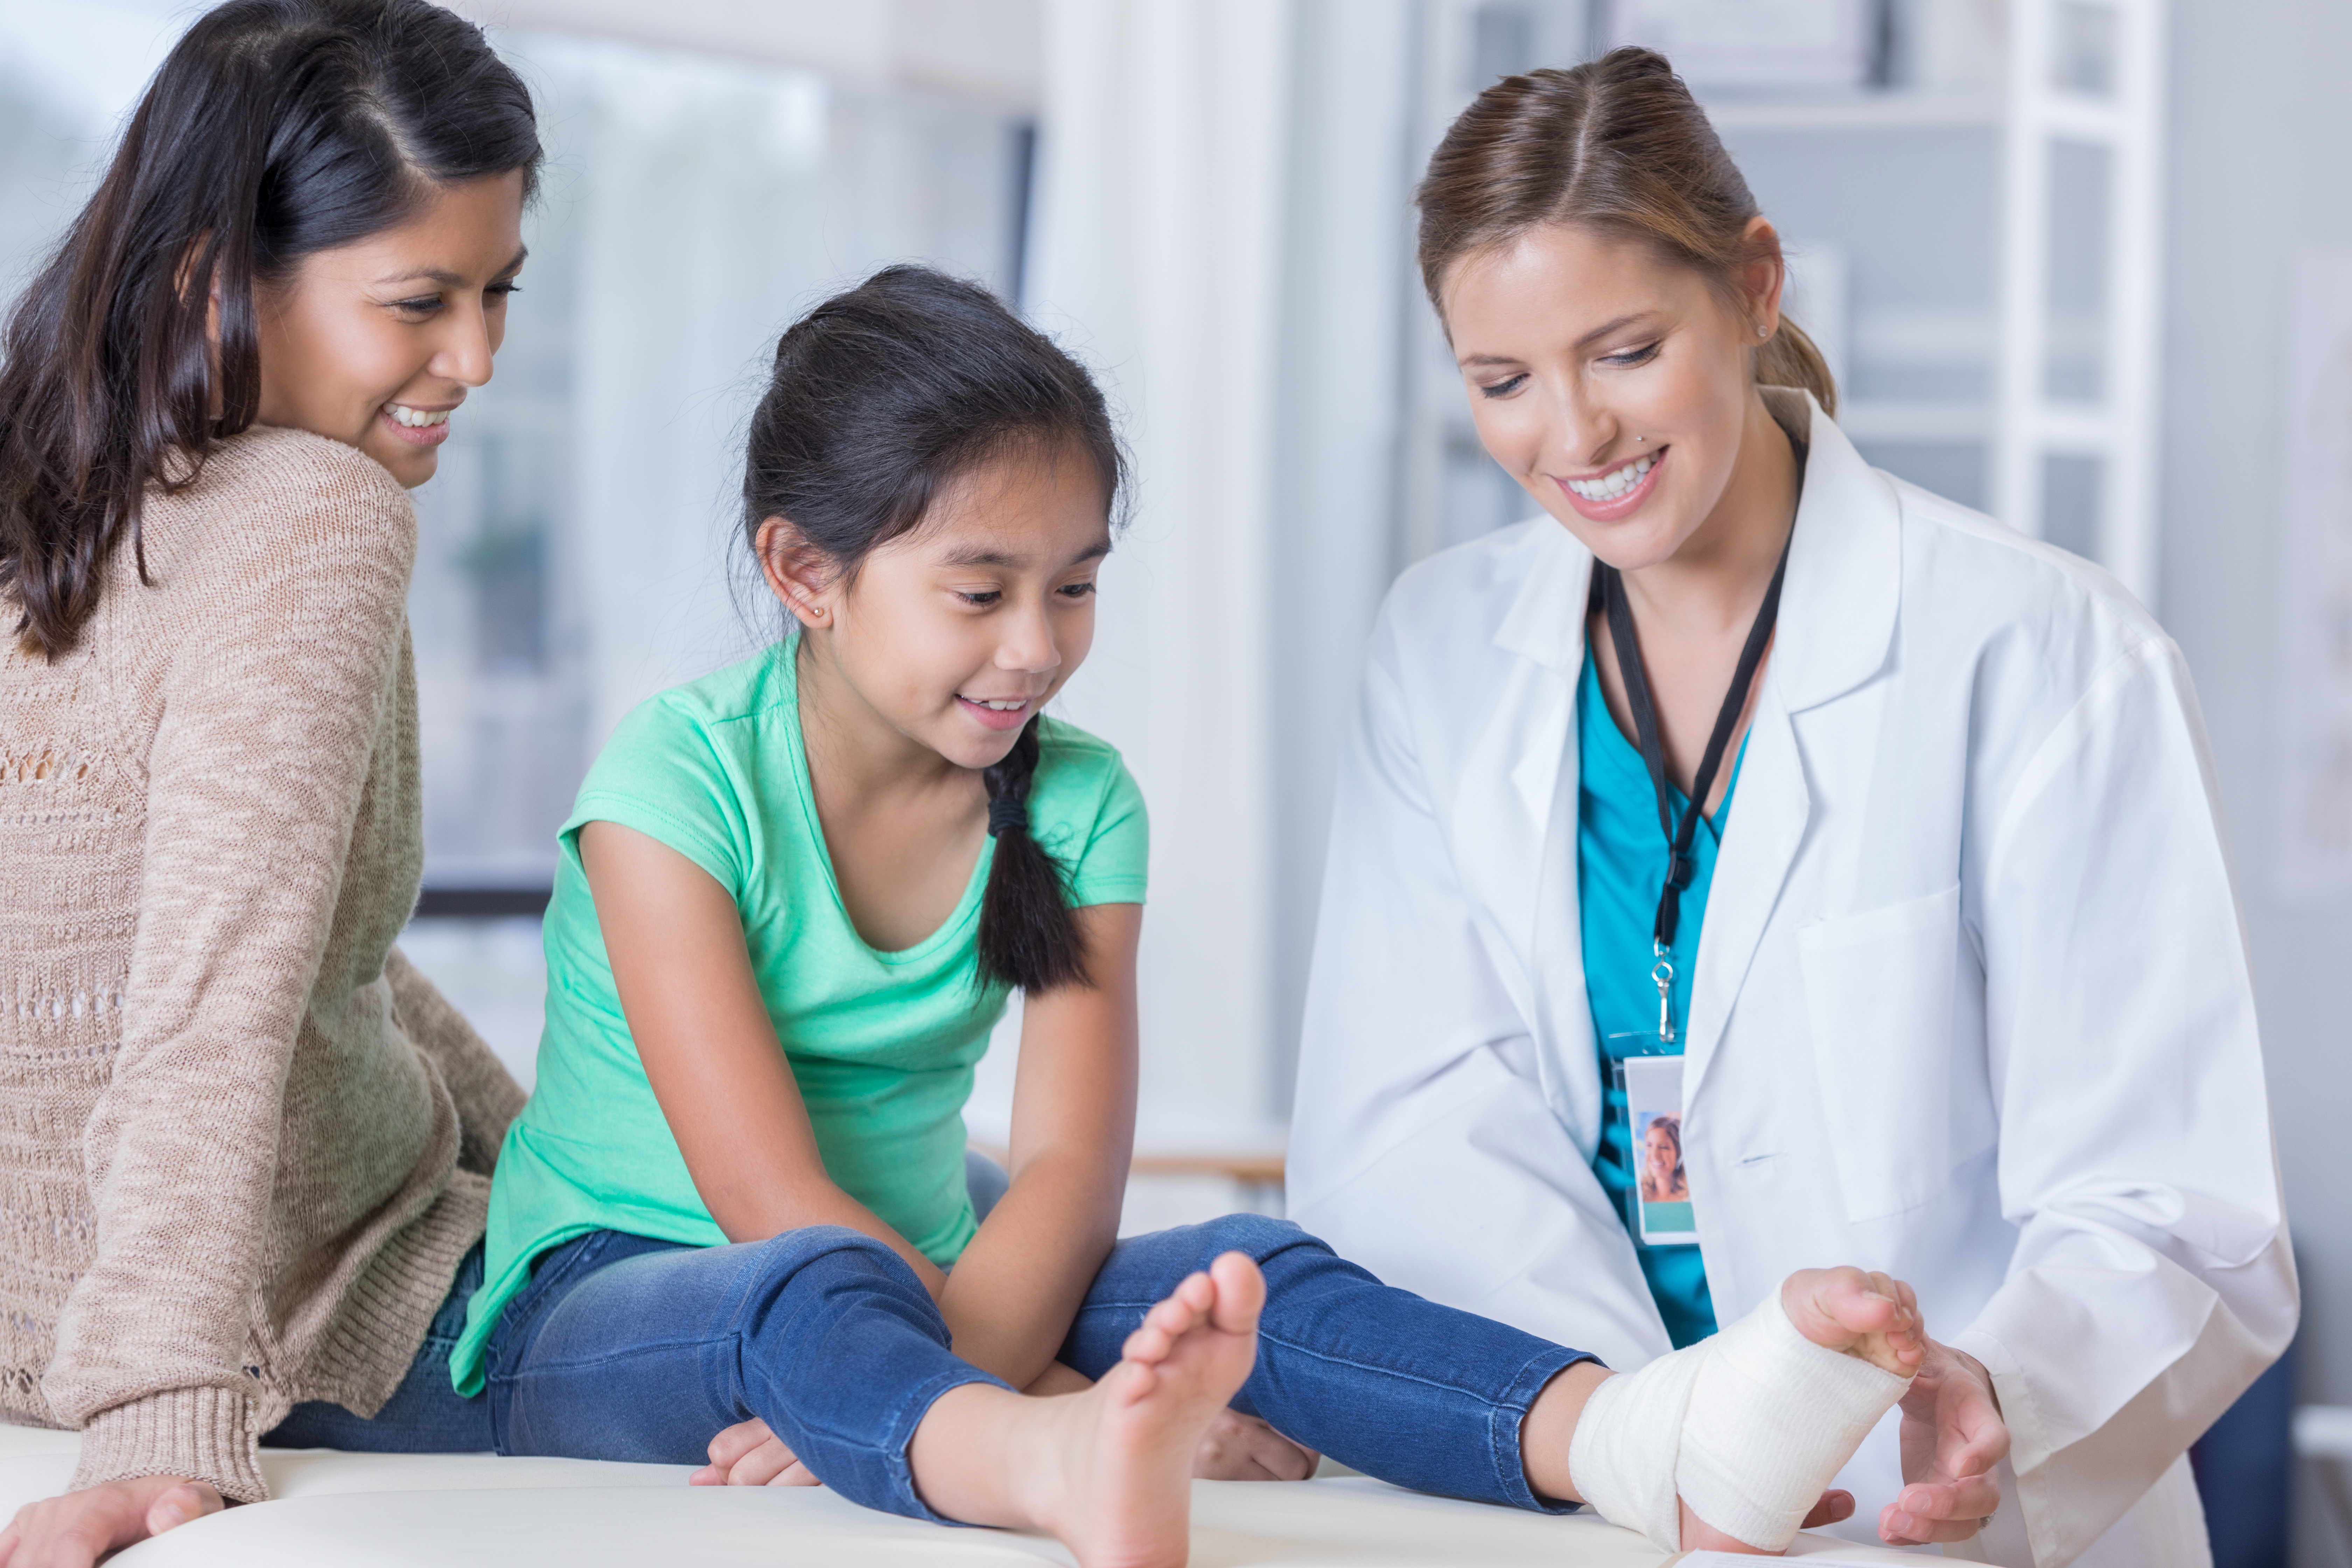 Pediatrician wraps a young girl's sprained ankle. The patient's mom is sitting next to the patient.